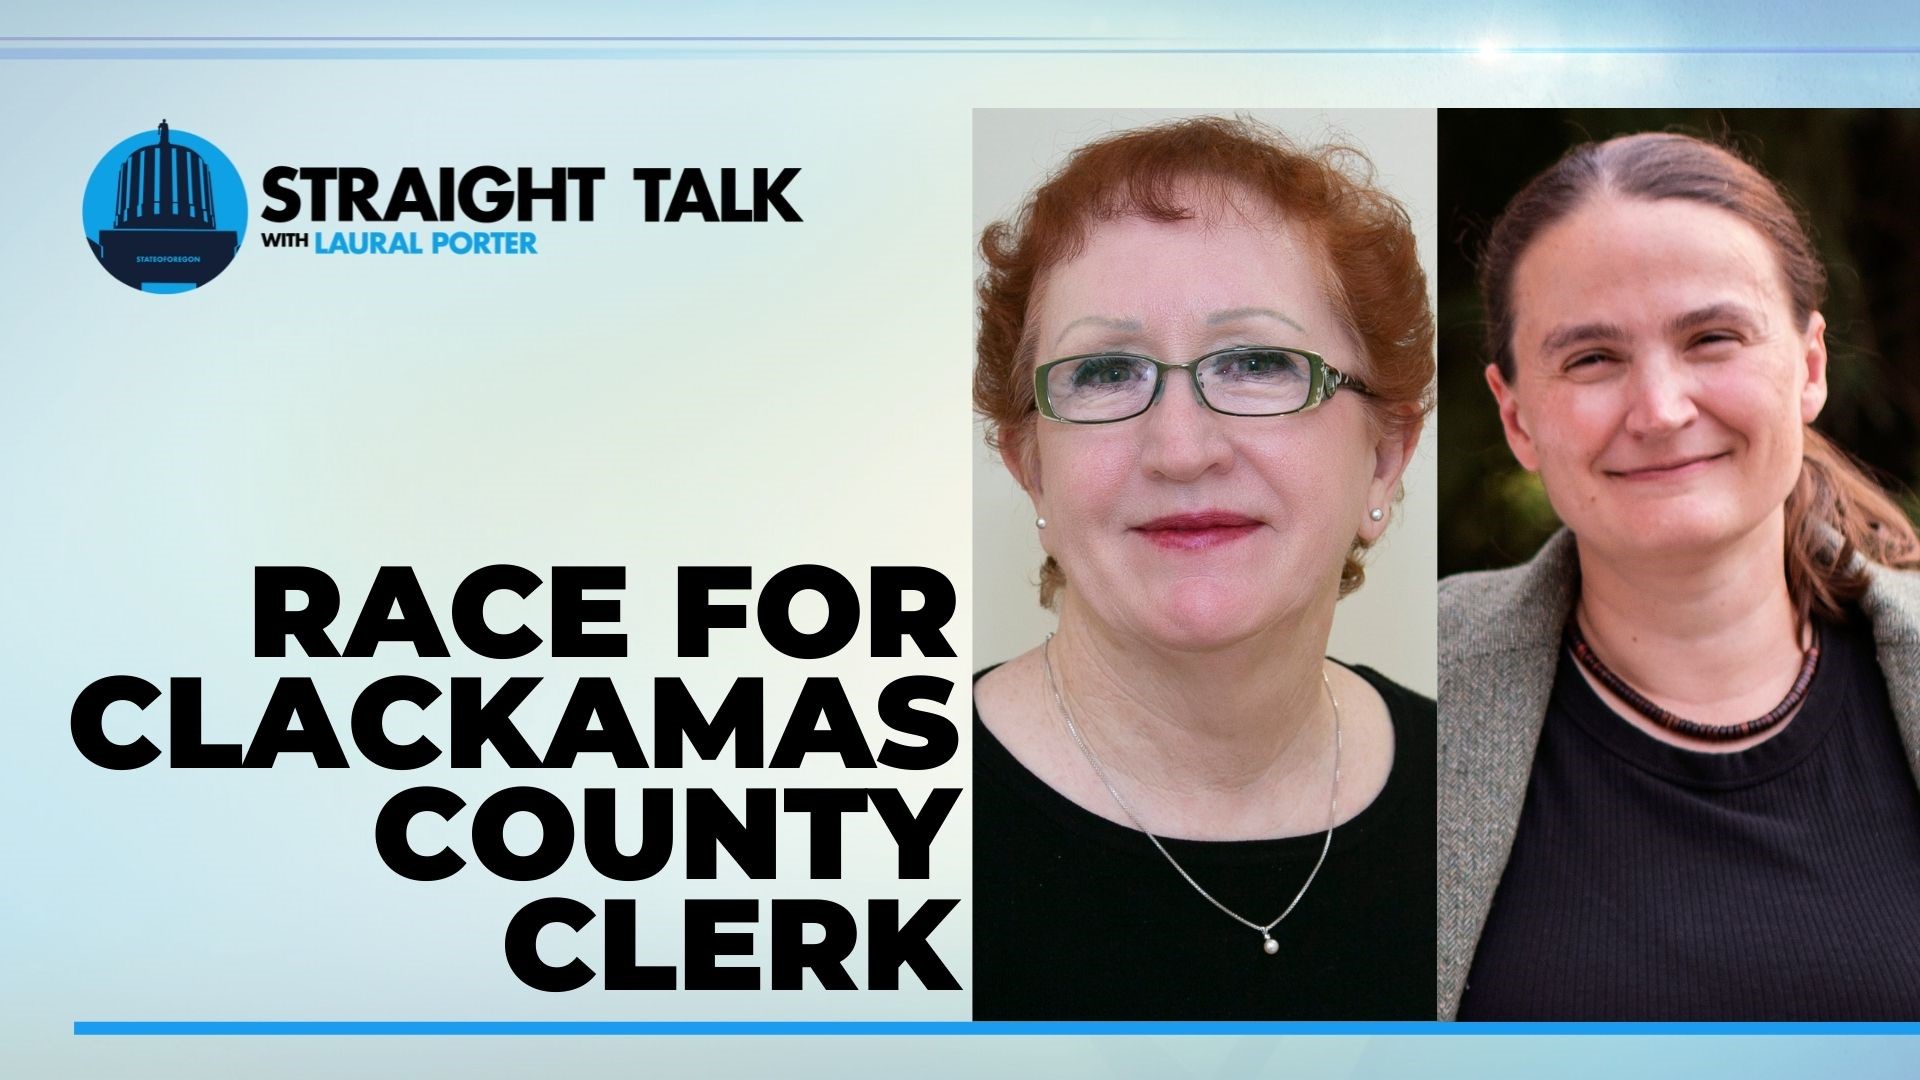 Clackamas County Clerk Sherry Hall is facing Catherine McMullen in the November election. This is McMullen's first run for office after 15 years of public service.